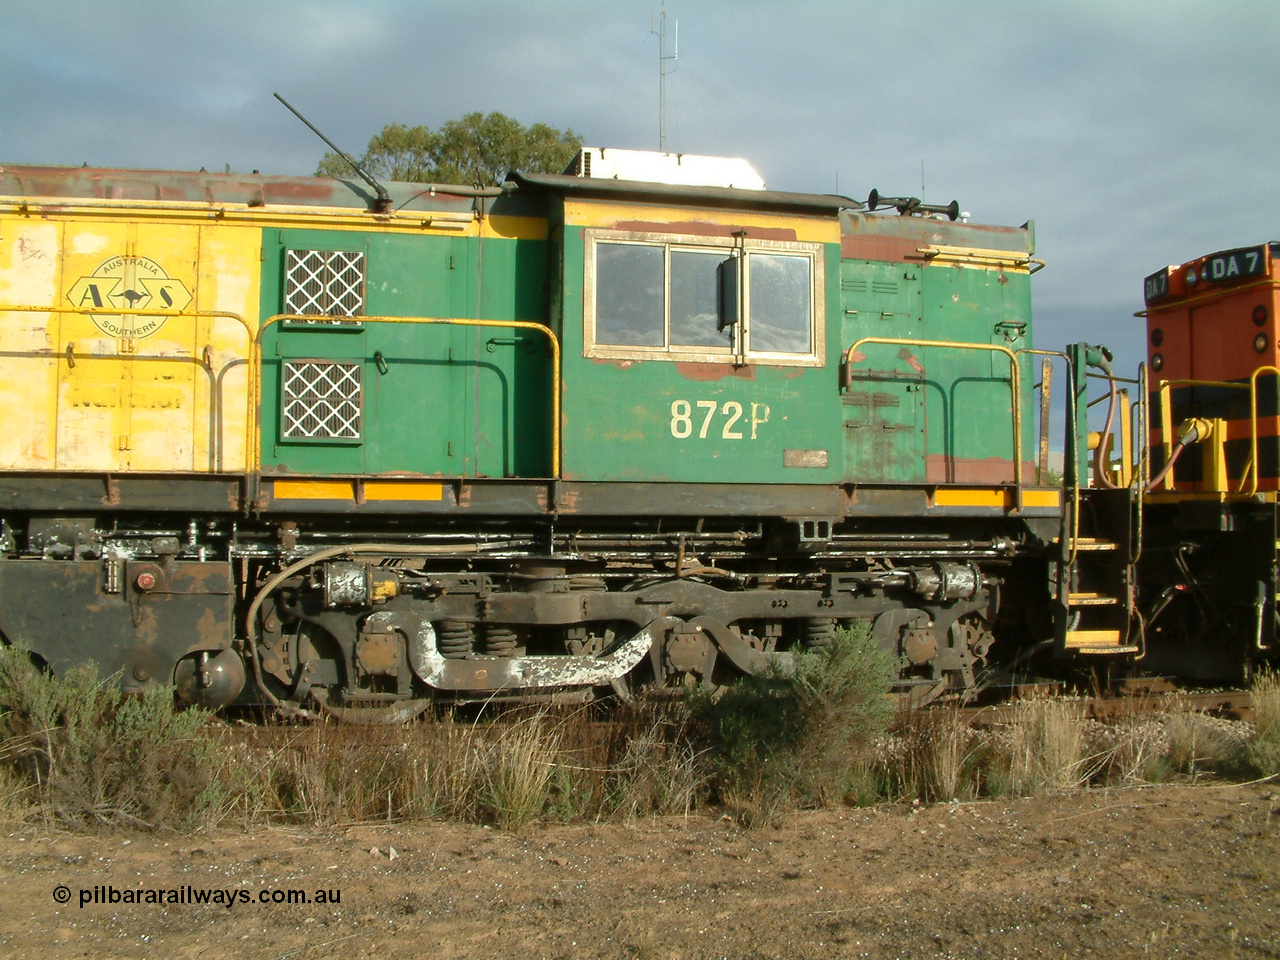 030409 081007
Warramboo, cab side shot of 830 class unit 872 AE Goodwin ALCo model DL531 serial G3422-02 was delivered new to the Eyre Peninsula in March 1966.
Keywords: 830-class;872;G3422-2;AE-Goodwin;ALCo;DL531;